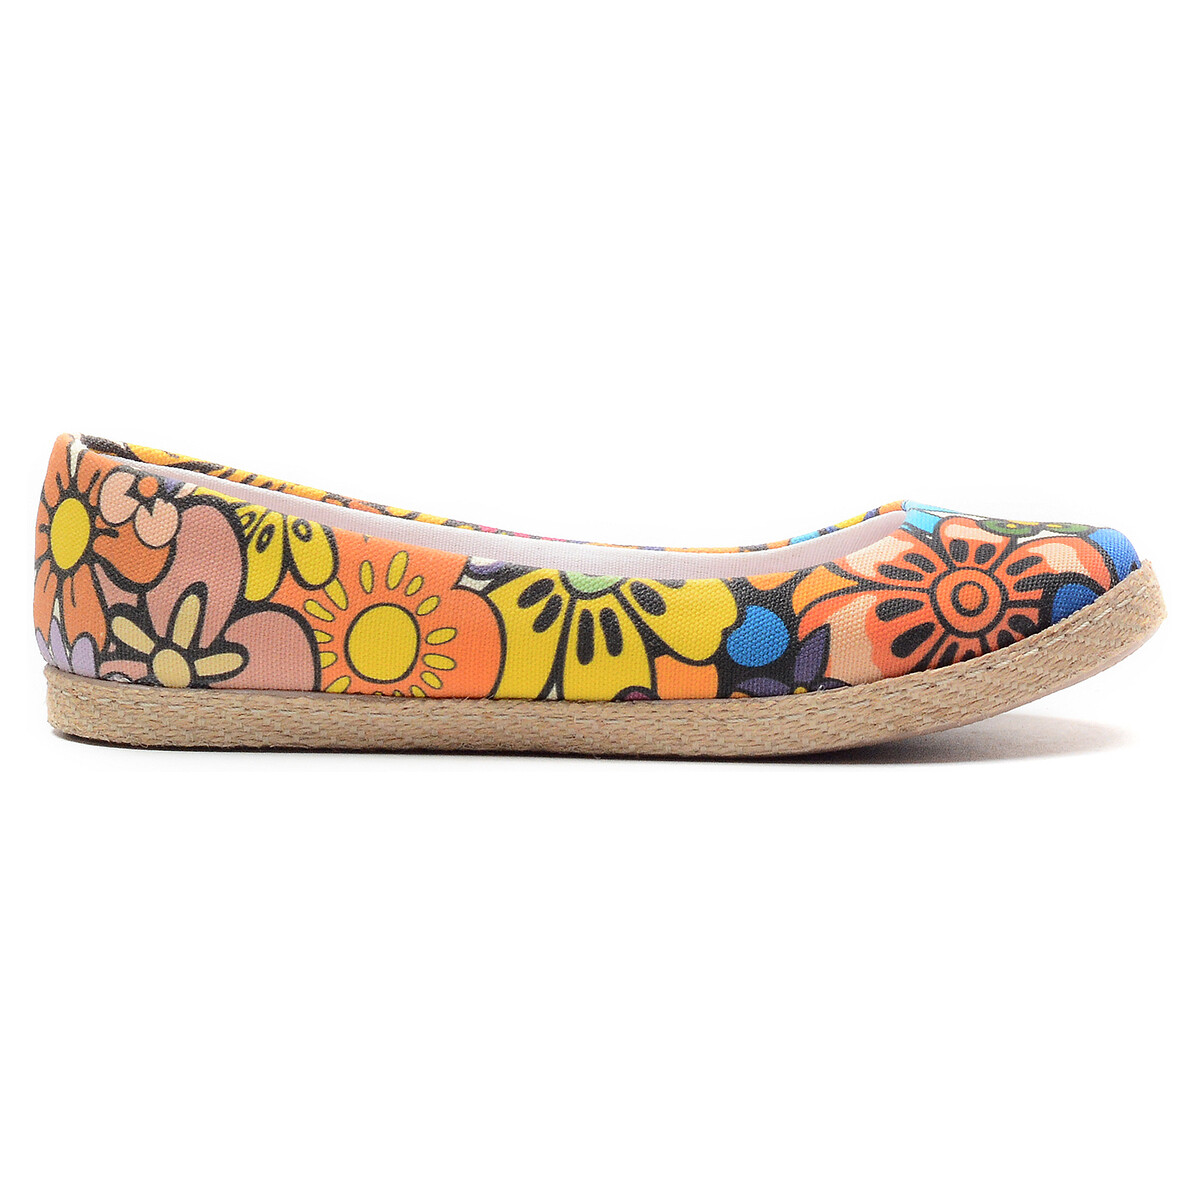 Chaussures Femme Espadrilles Goby FBR1194 multicolorful